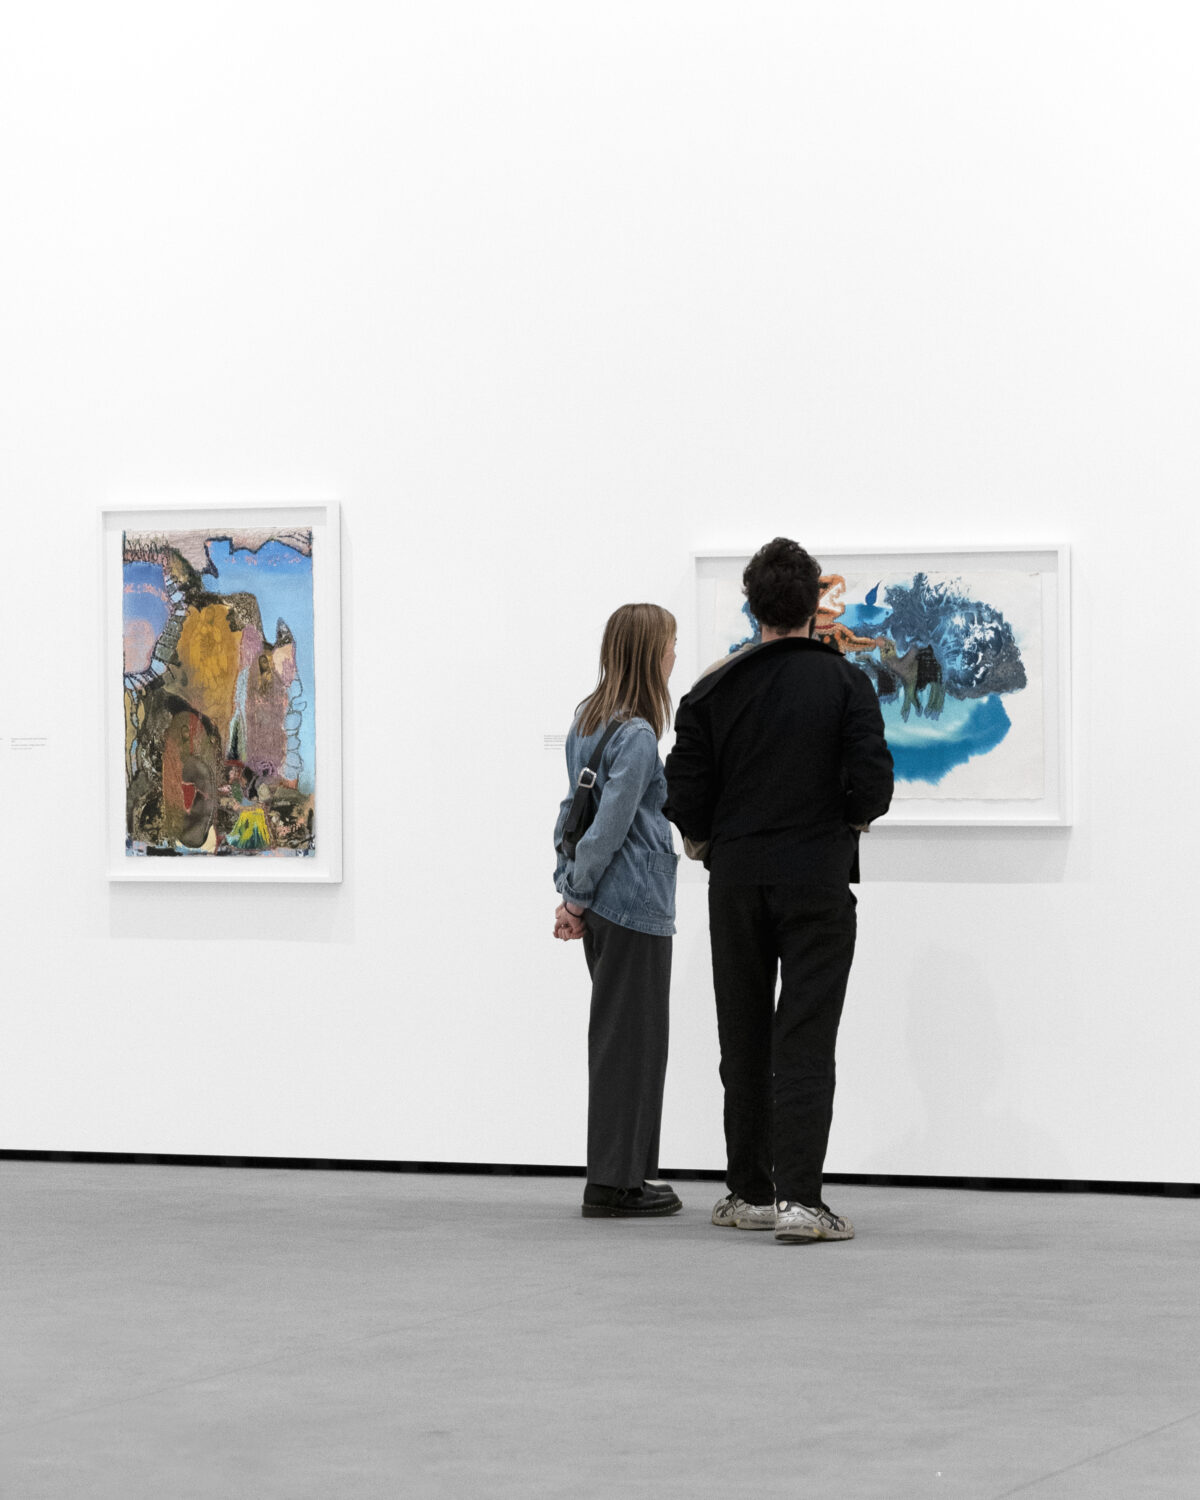 Image of two people wearing comfortable clothes in front of artwork in a large gallery